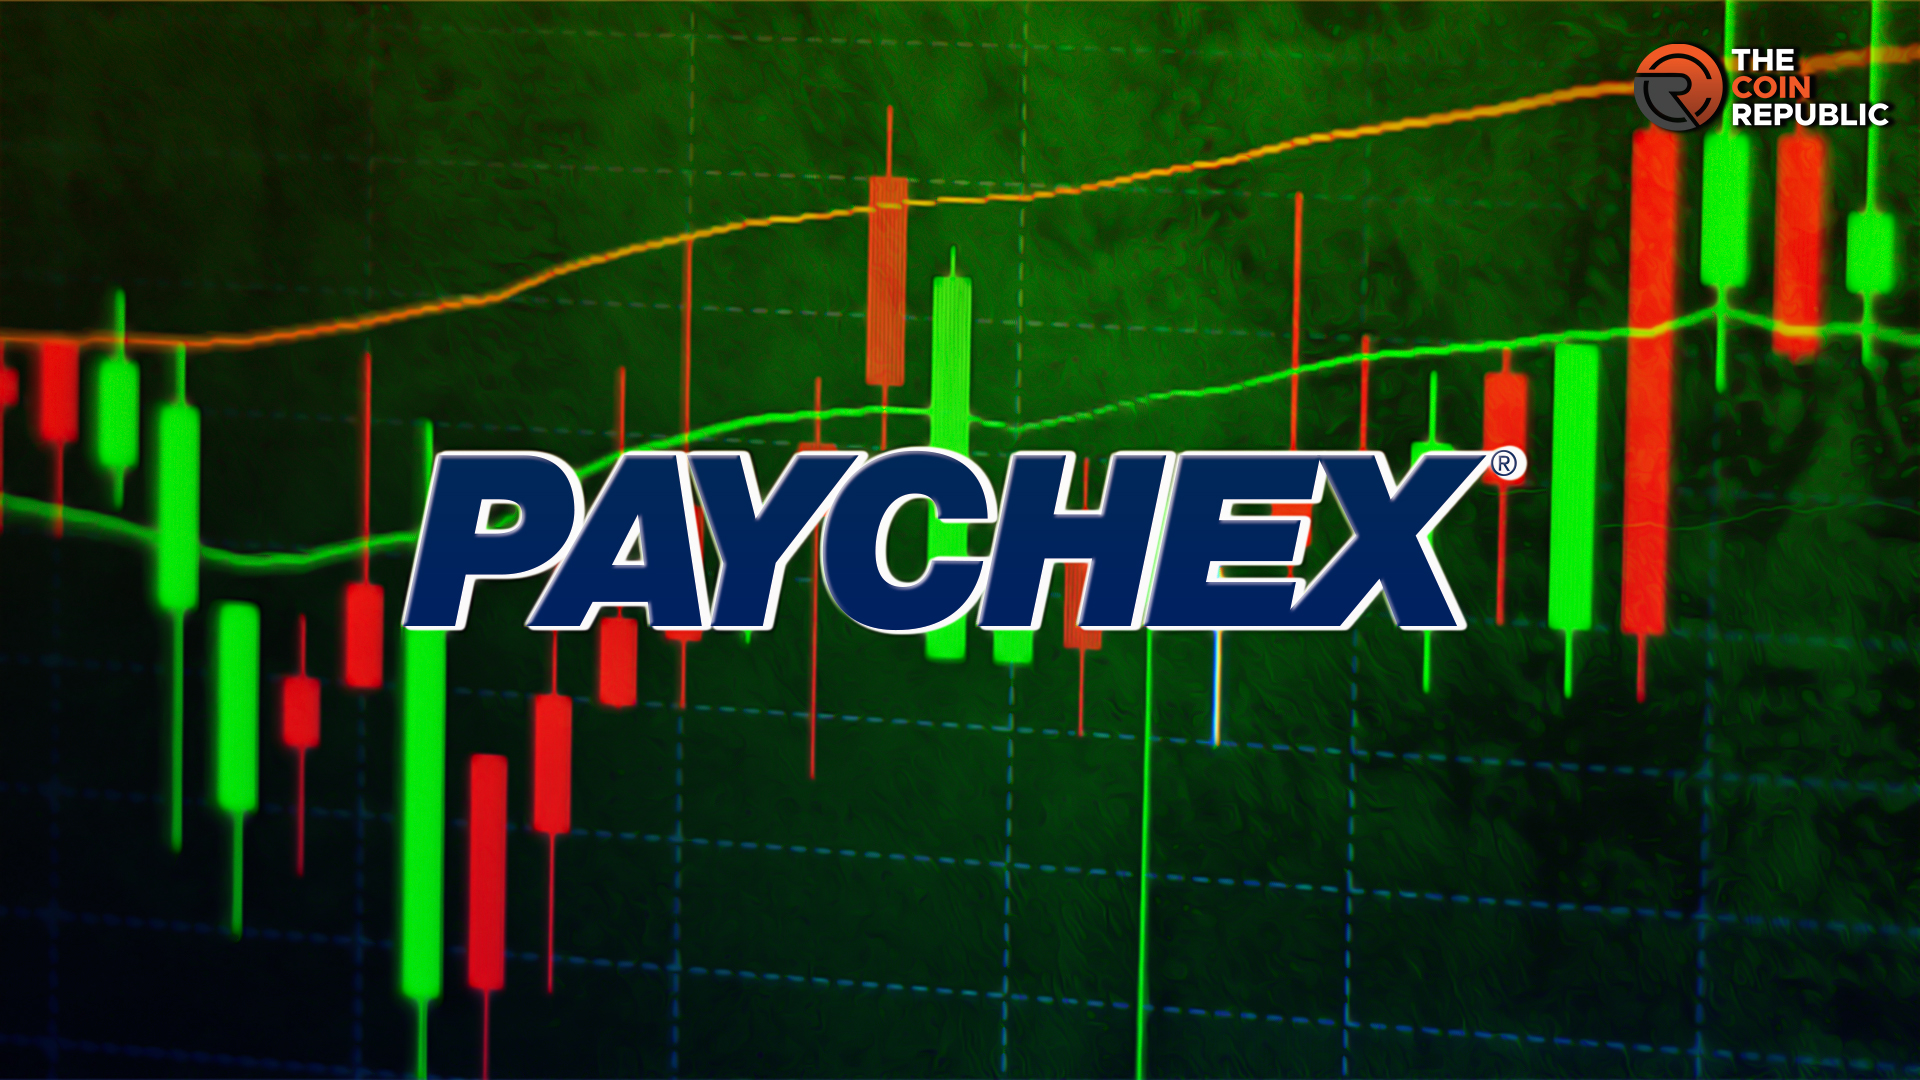 Paychex (PAYX) Stock: Price Jumps 3.36% After Q1 Report Release 